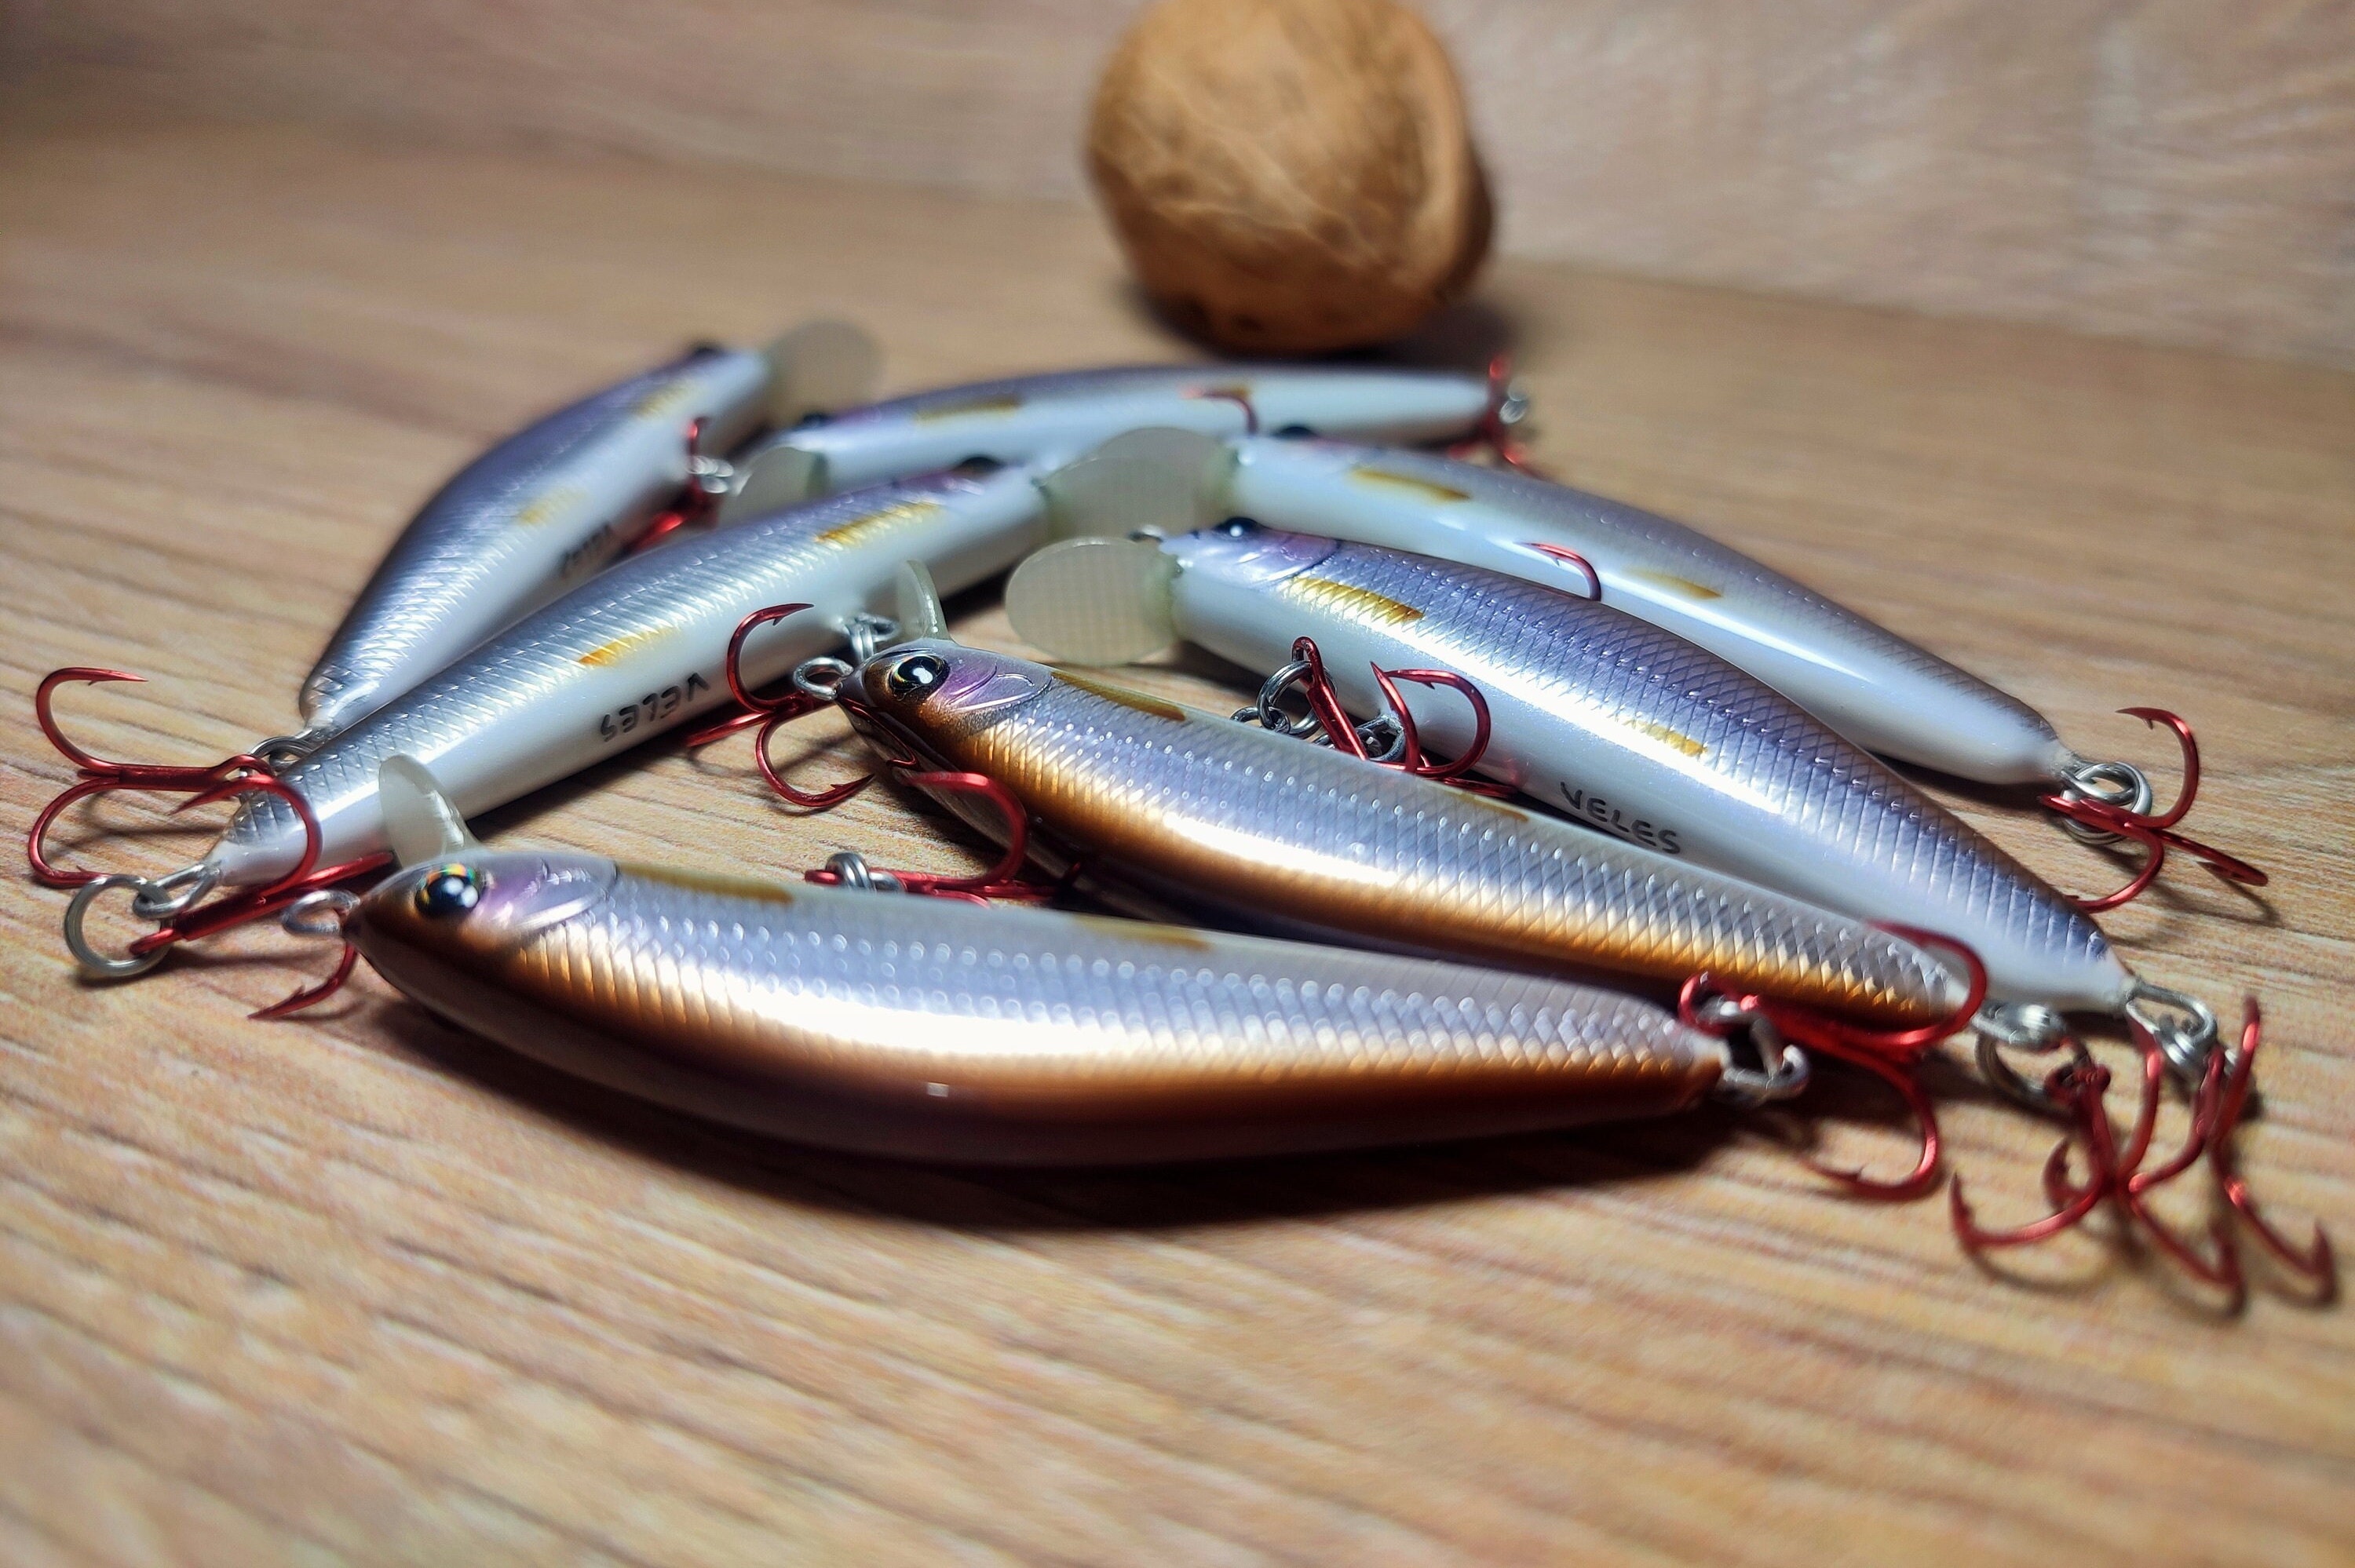 Veles Handcrafted Lure 40mm-2,8gr Sinking. Trout Fishing Lure. Twitching  Action Bait. Made From Balsa Wood. Single Inline Hooks. 